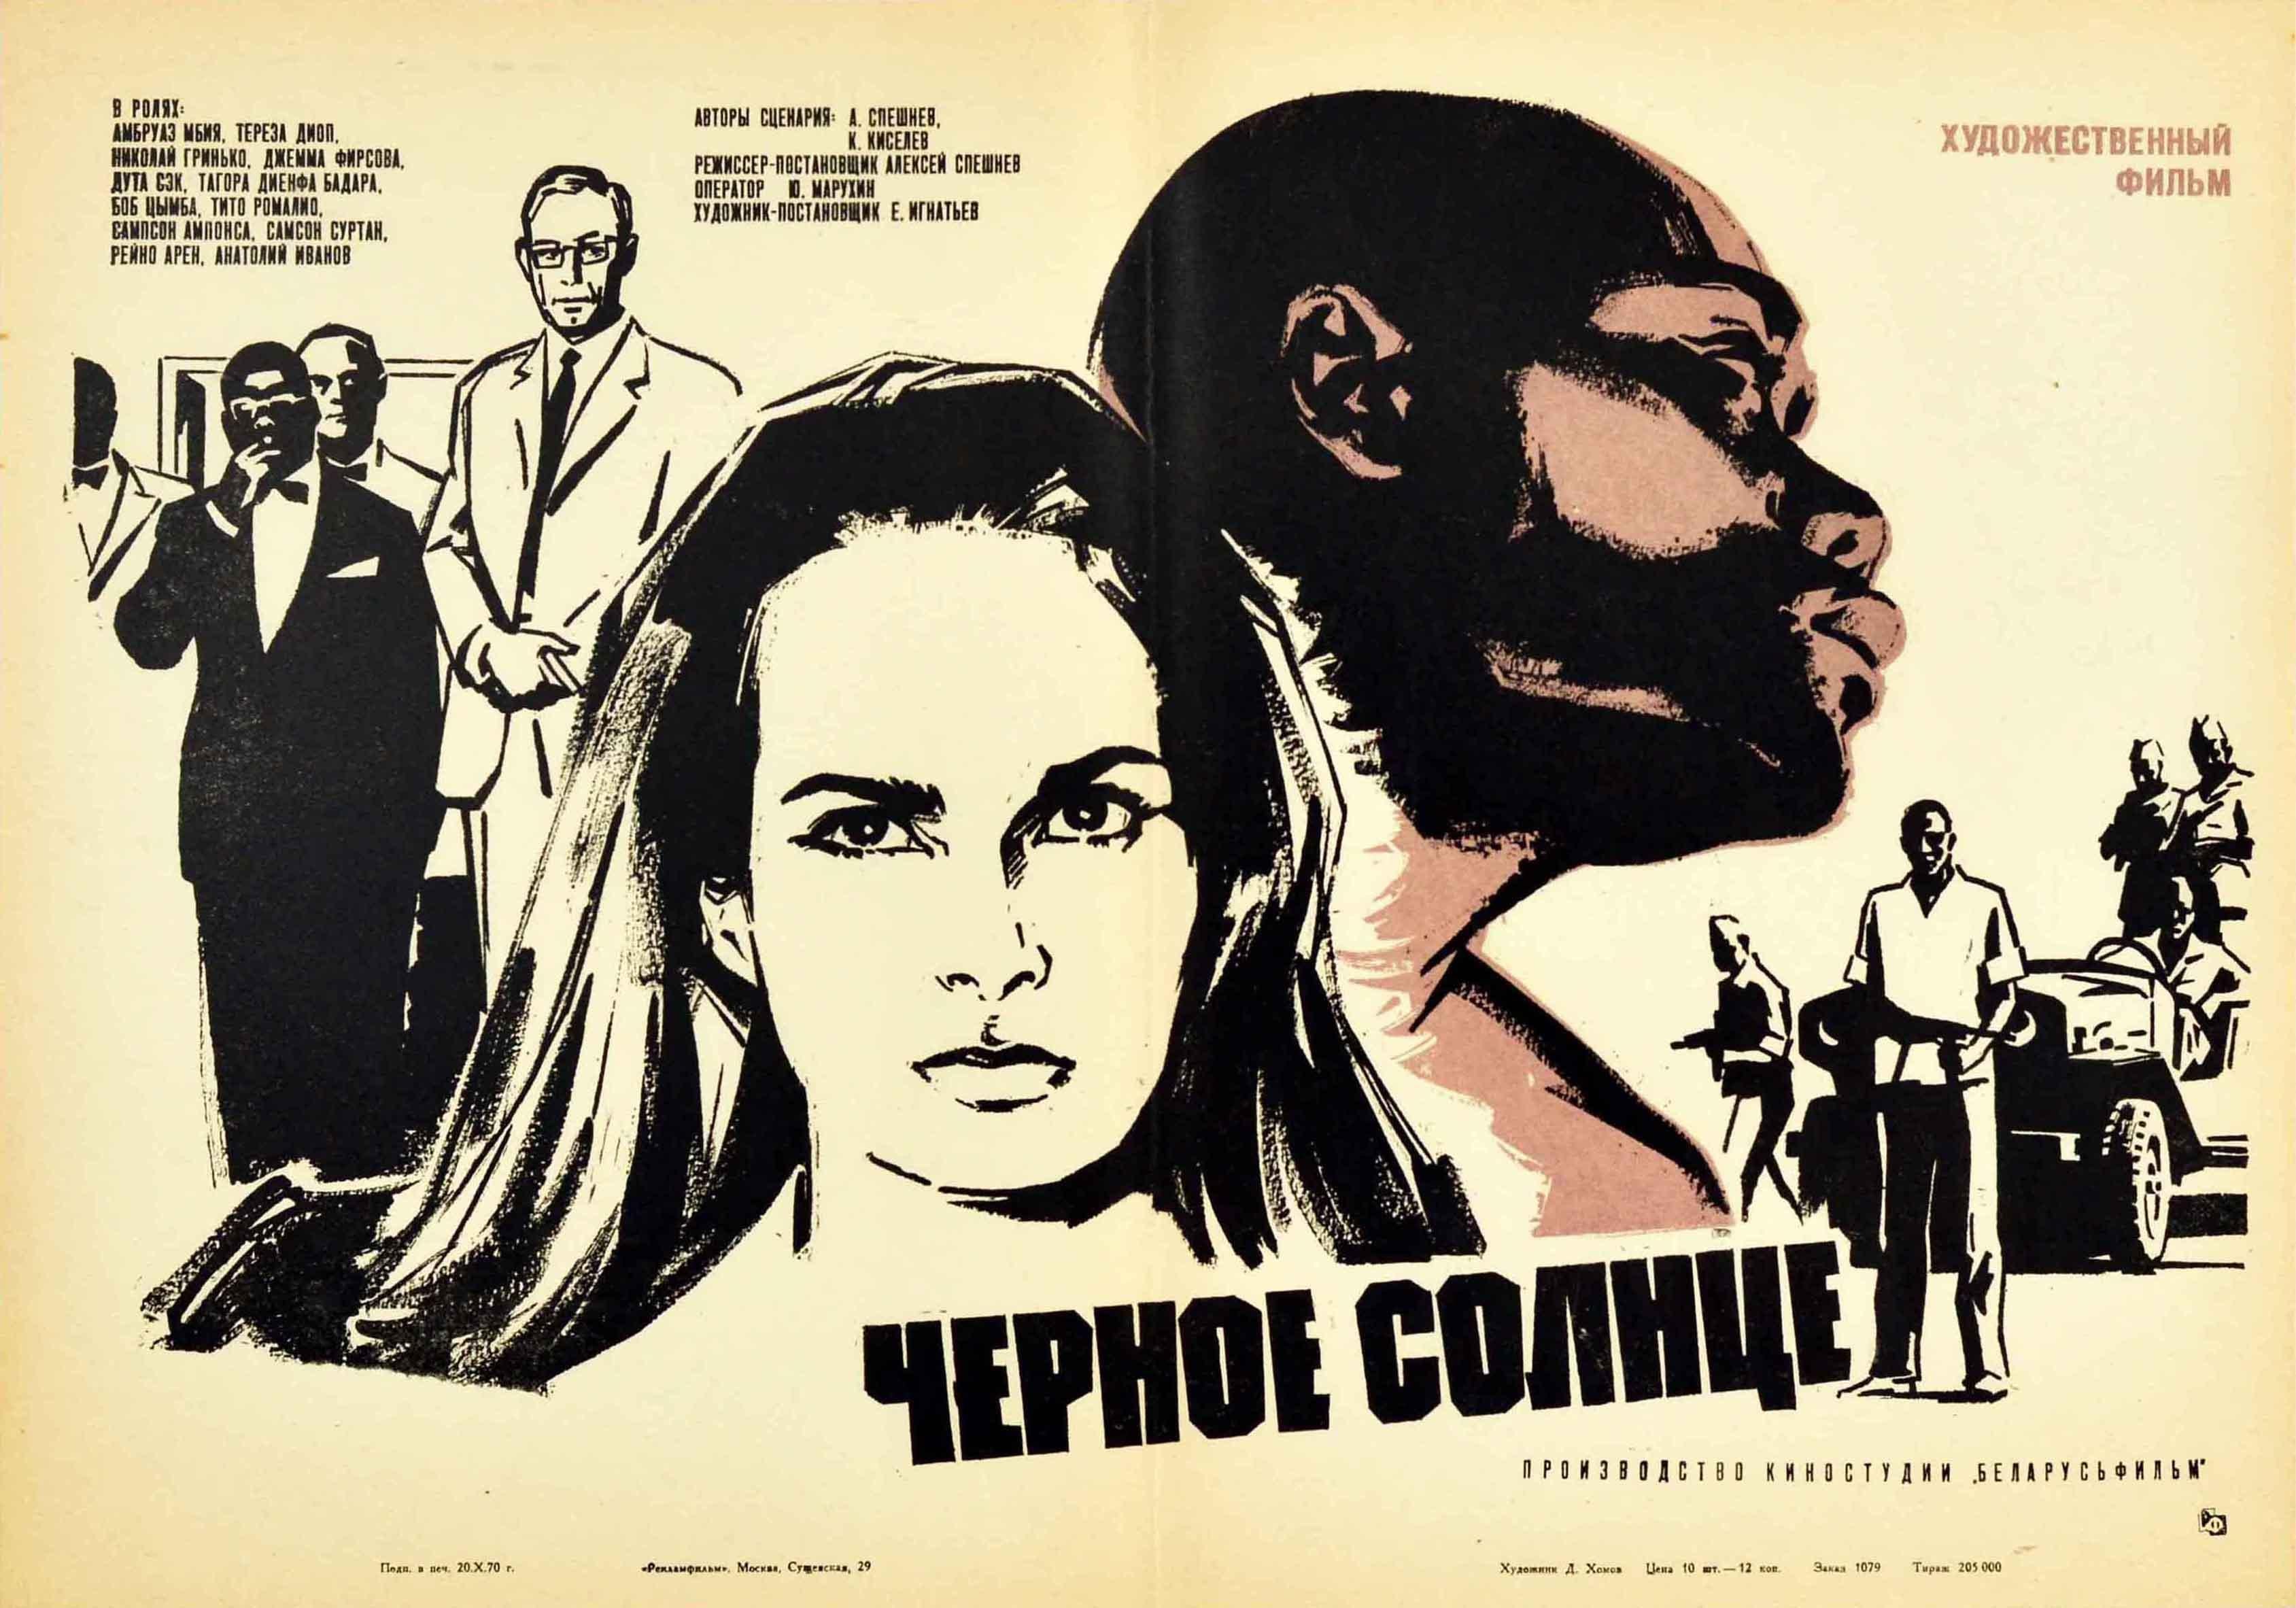 Original vintage Soviet film poster for political drama film ?????? ?????? / Black Sun based on the biography of the Congolese politician Patrice Lumumba (1925-1961) and set during the 1960-1965 Congo Crisis, directed by Aleksei Speshnev and